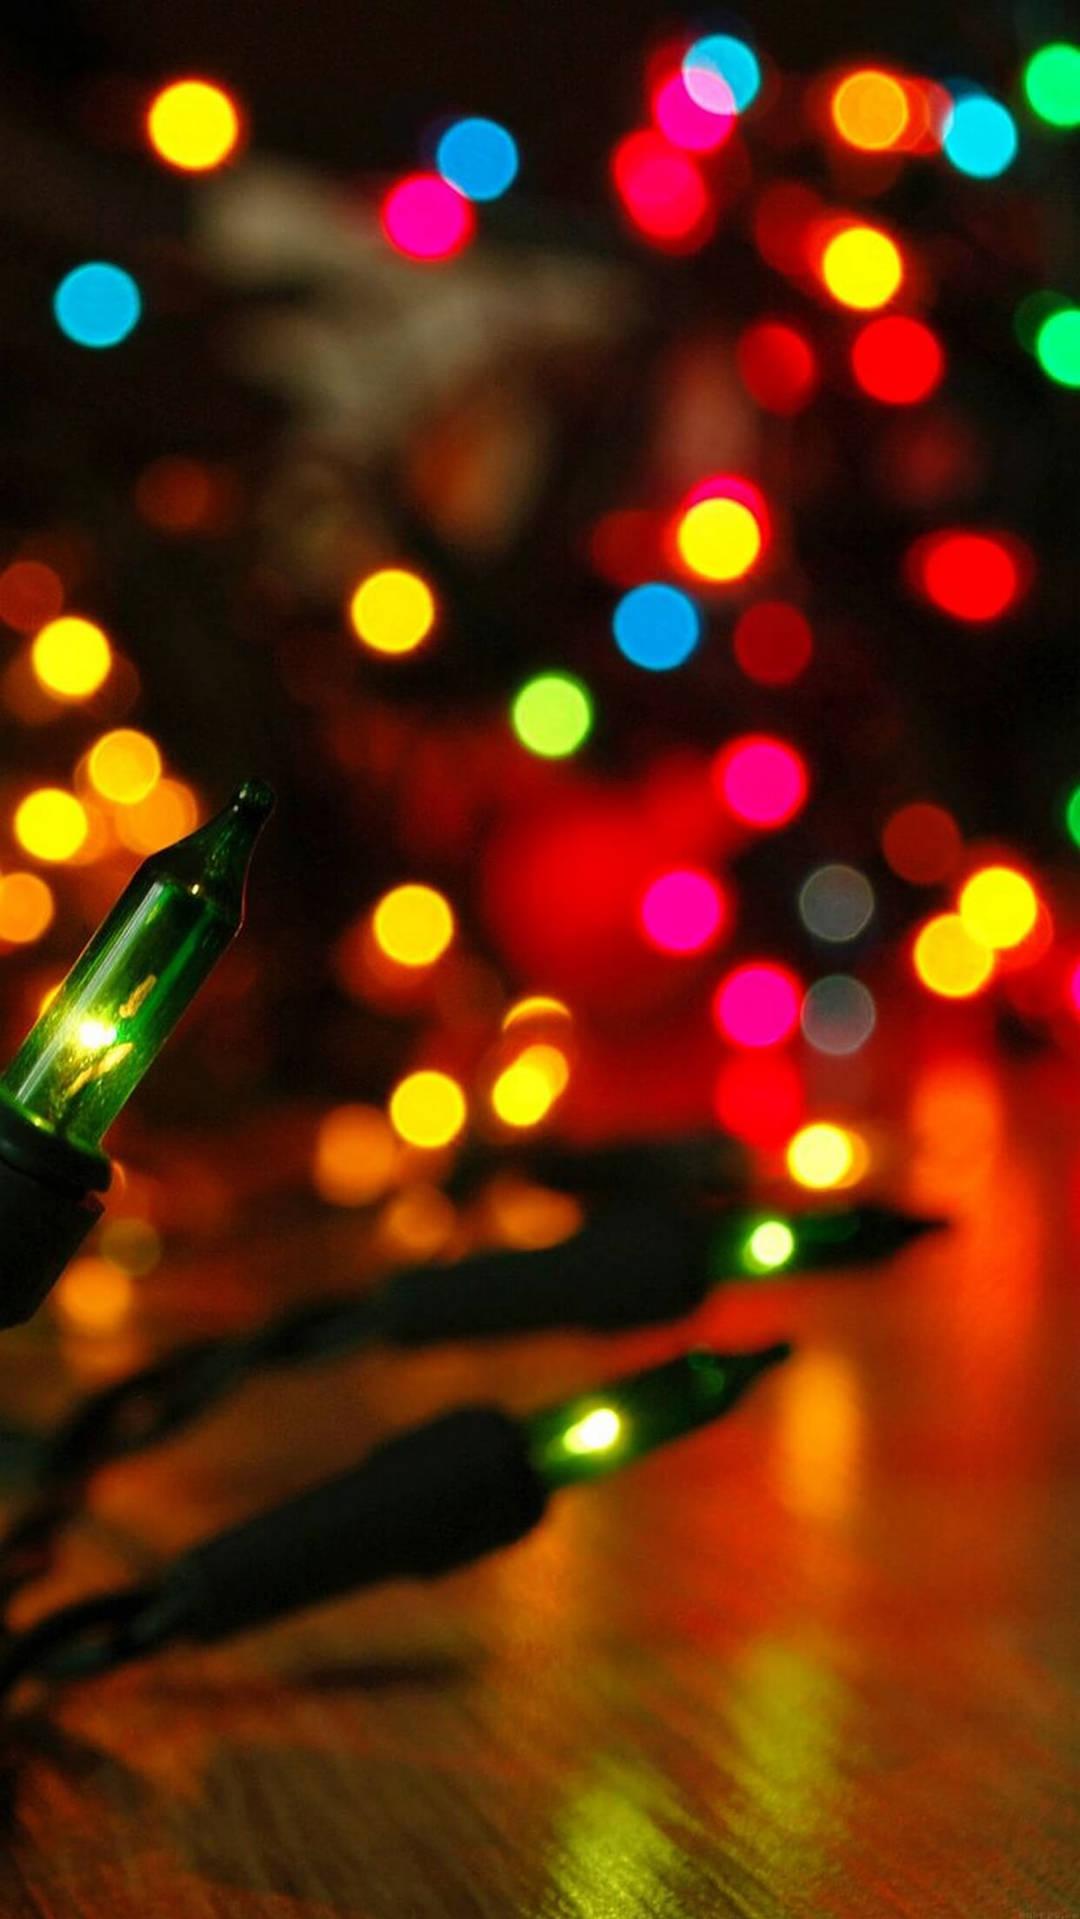 Enjoy The Magical Christmas Lights On Your iPhone